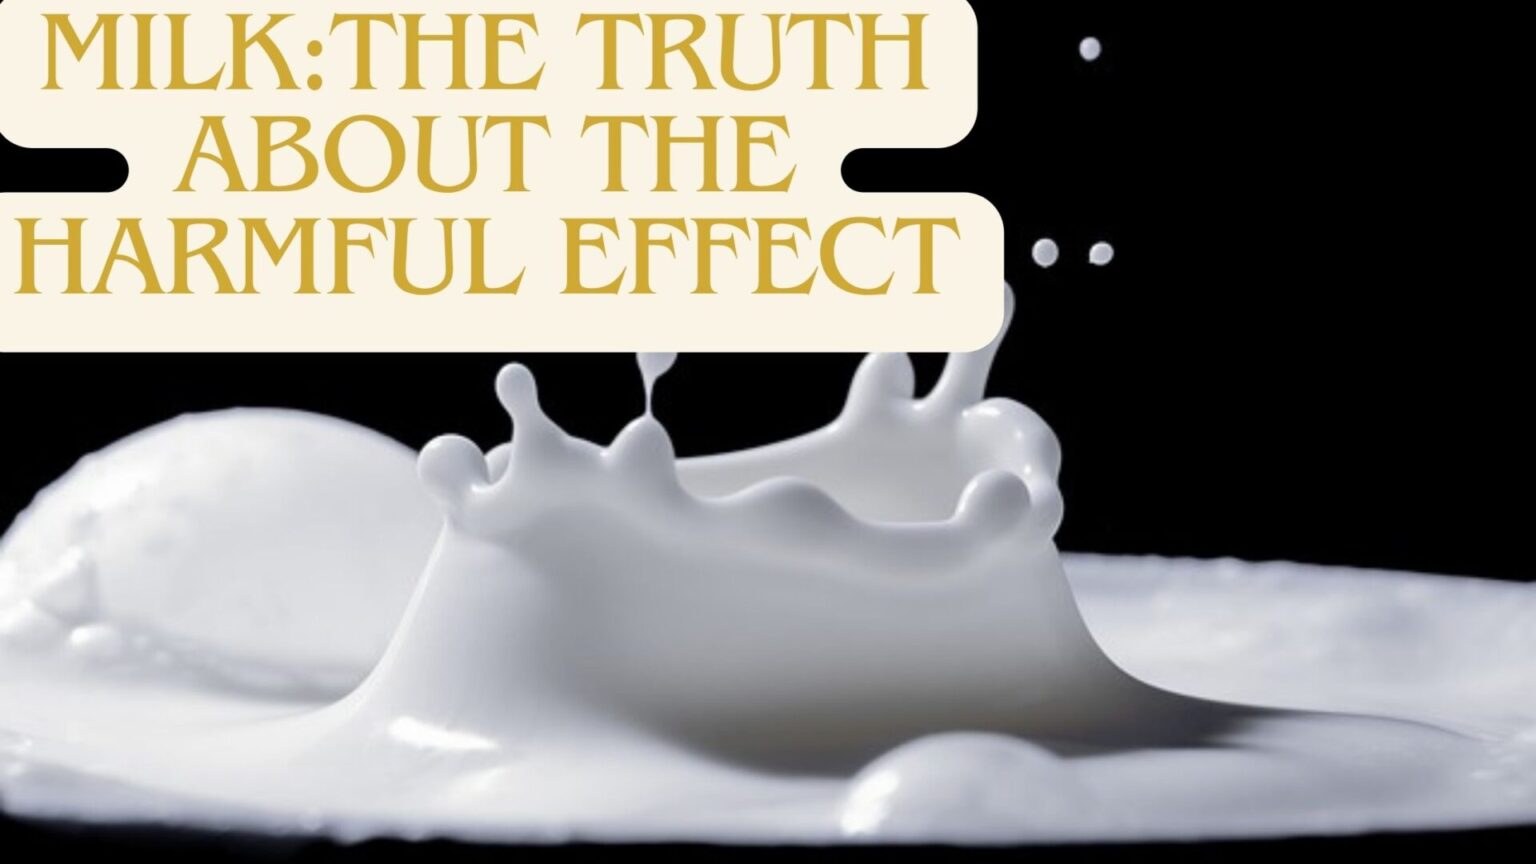 milk:the truth about the harmful effect